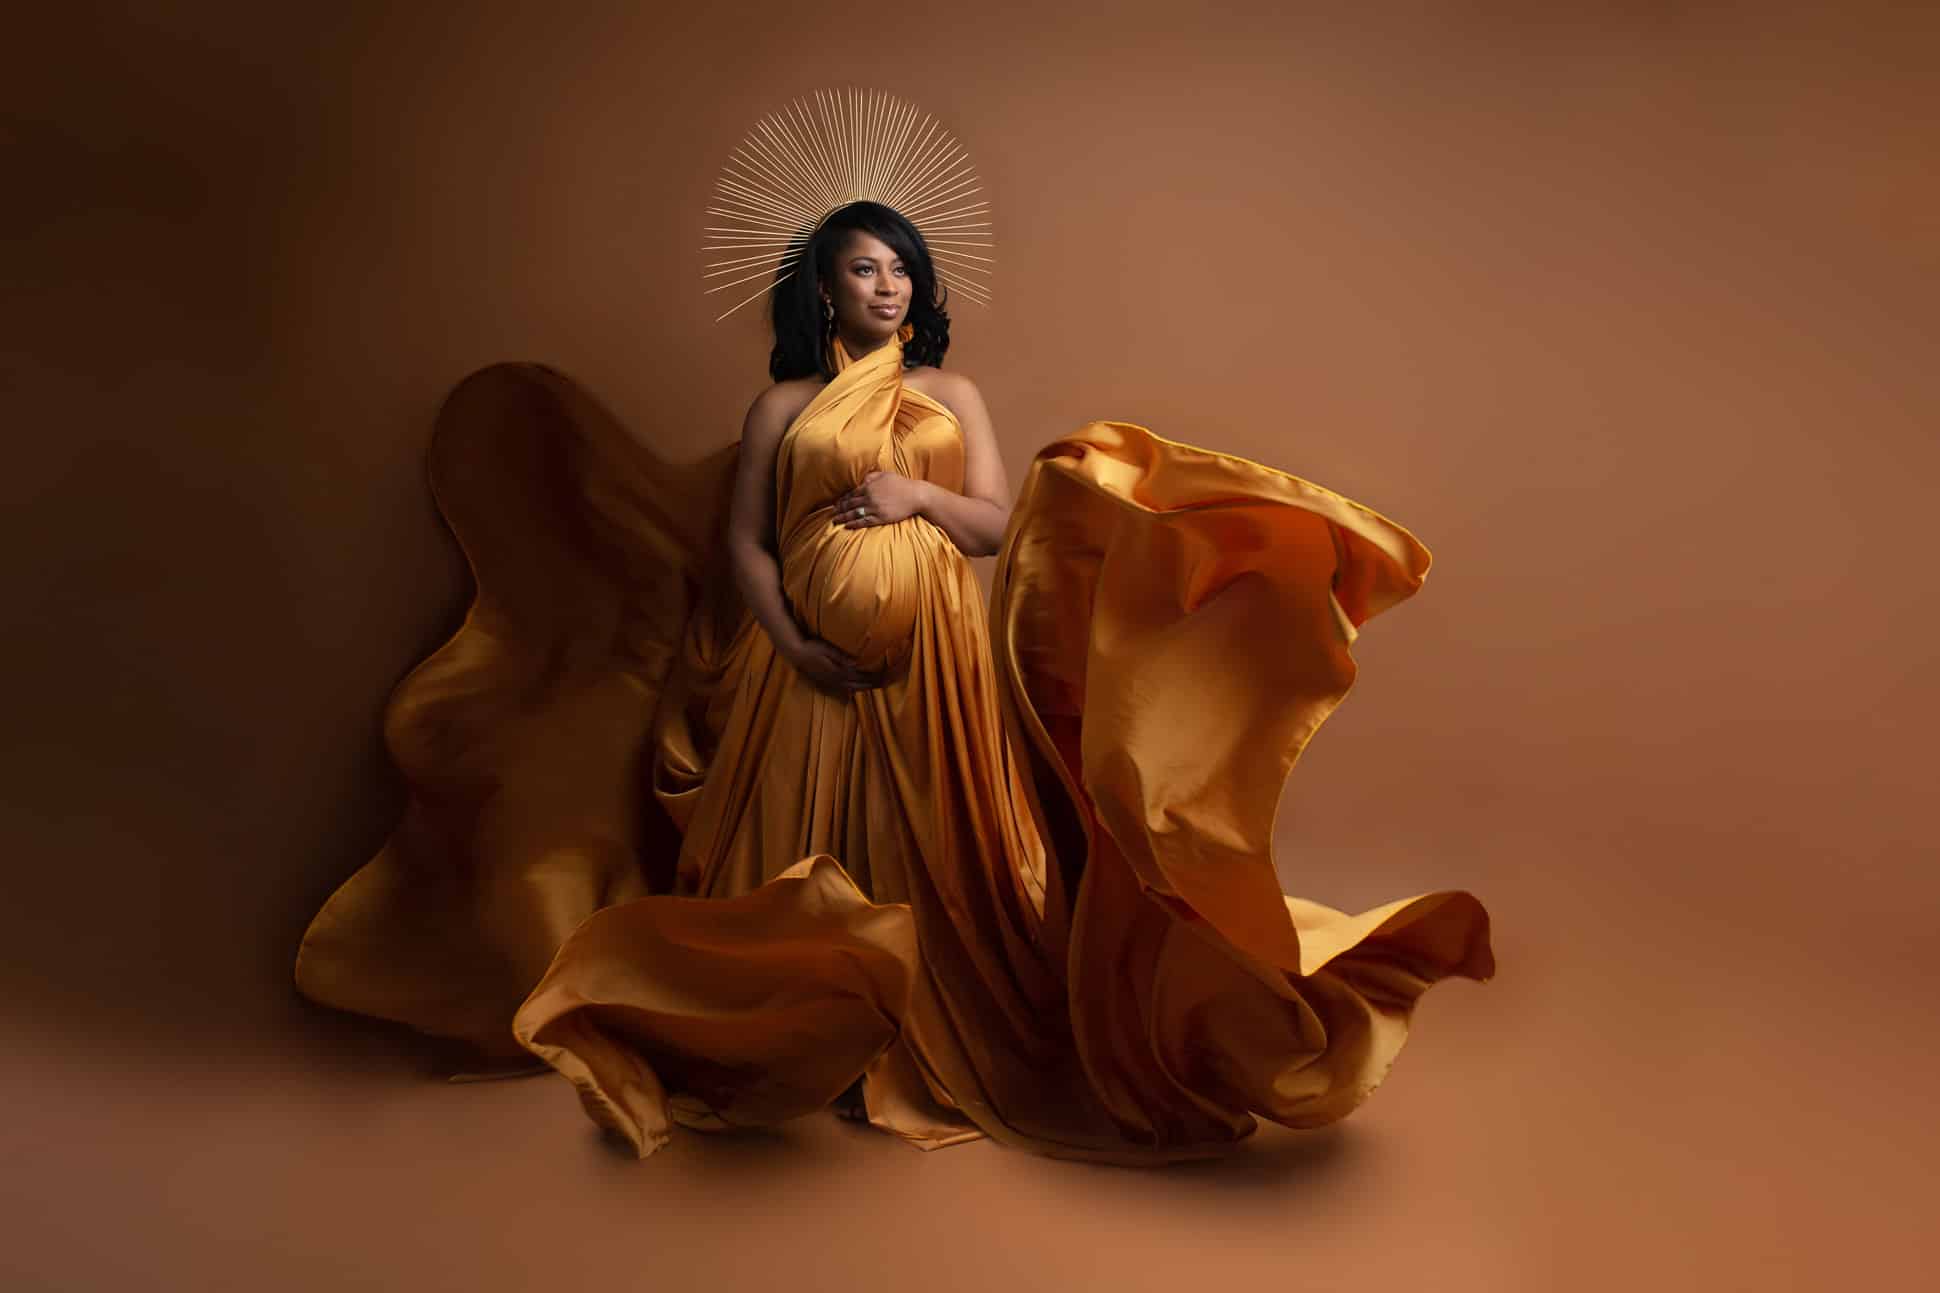 Dallas Maternity photographer poses expectant mom on brown background with flowing gold fabric flying all around and gold crown